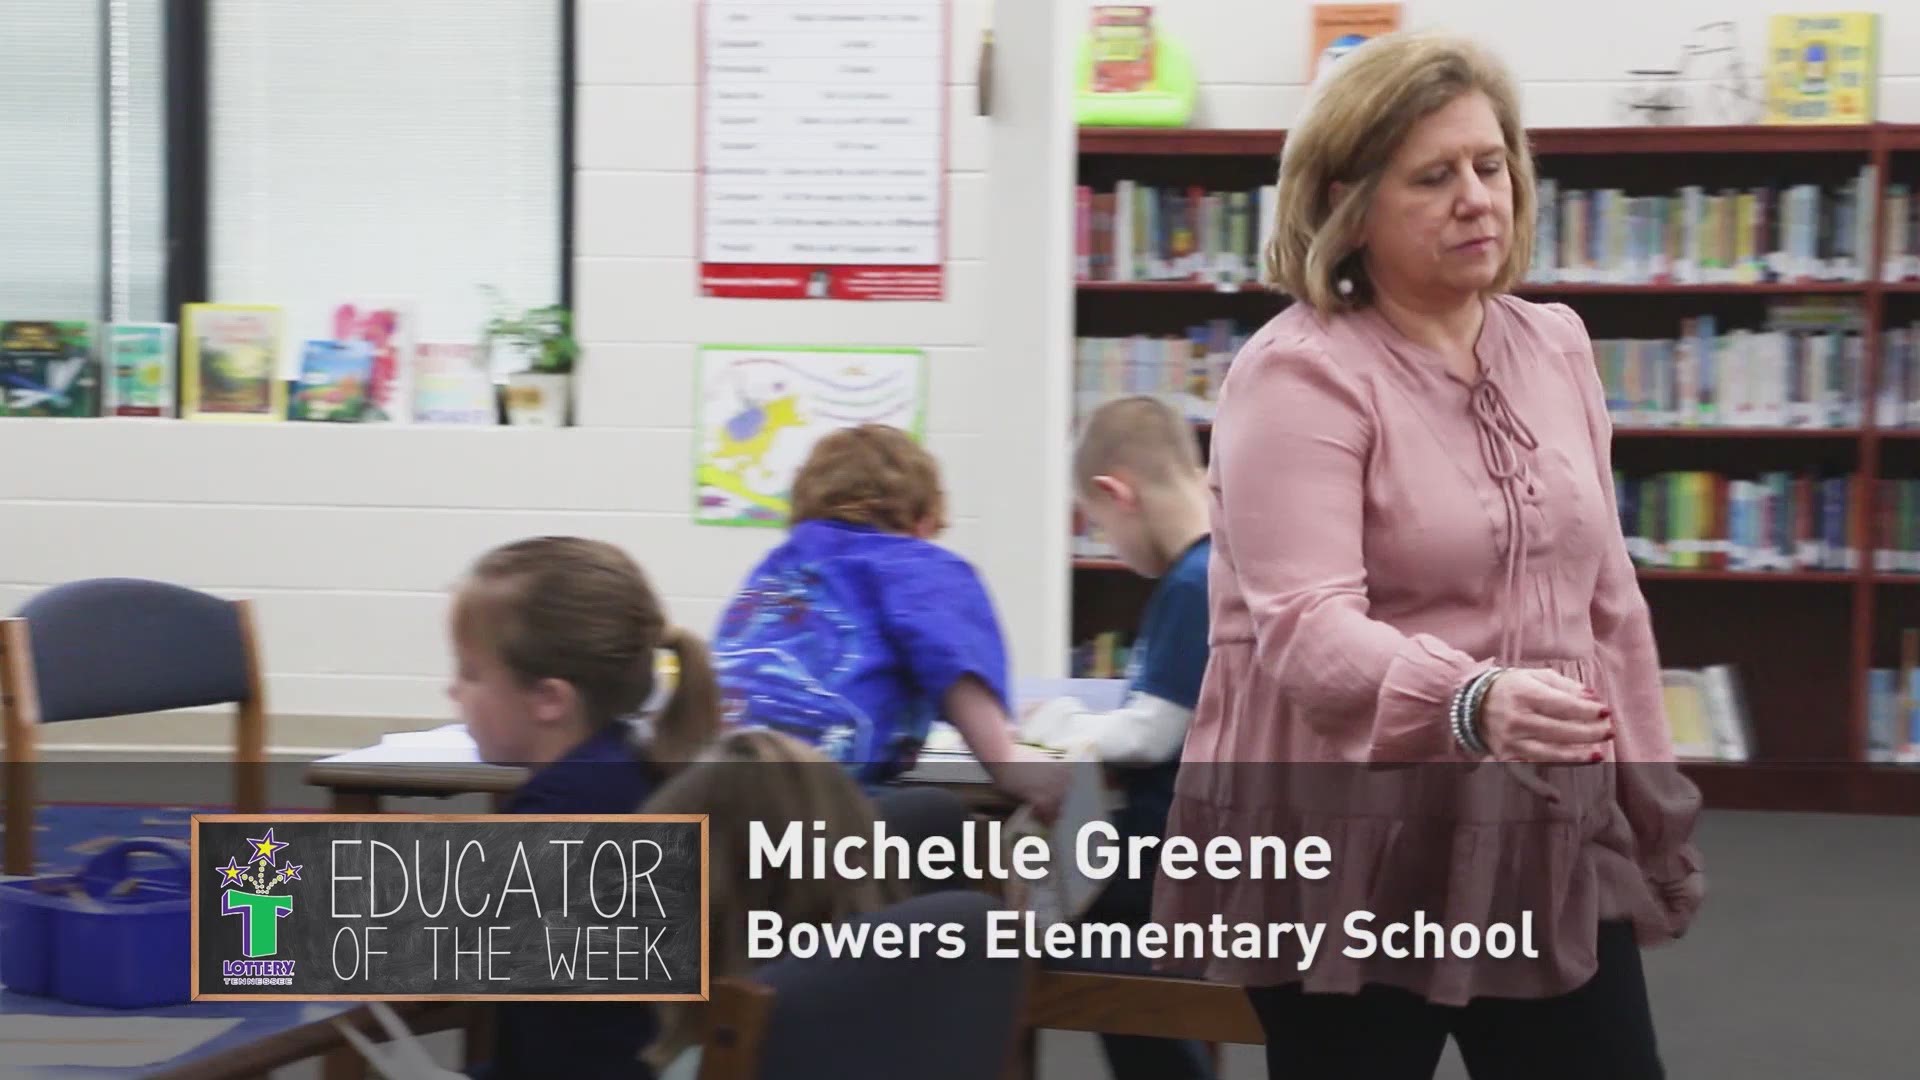 Educator of the Week 4/23 is Michelle Green